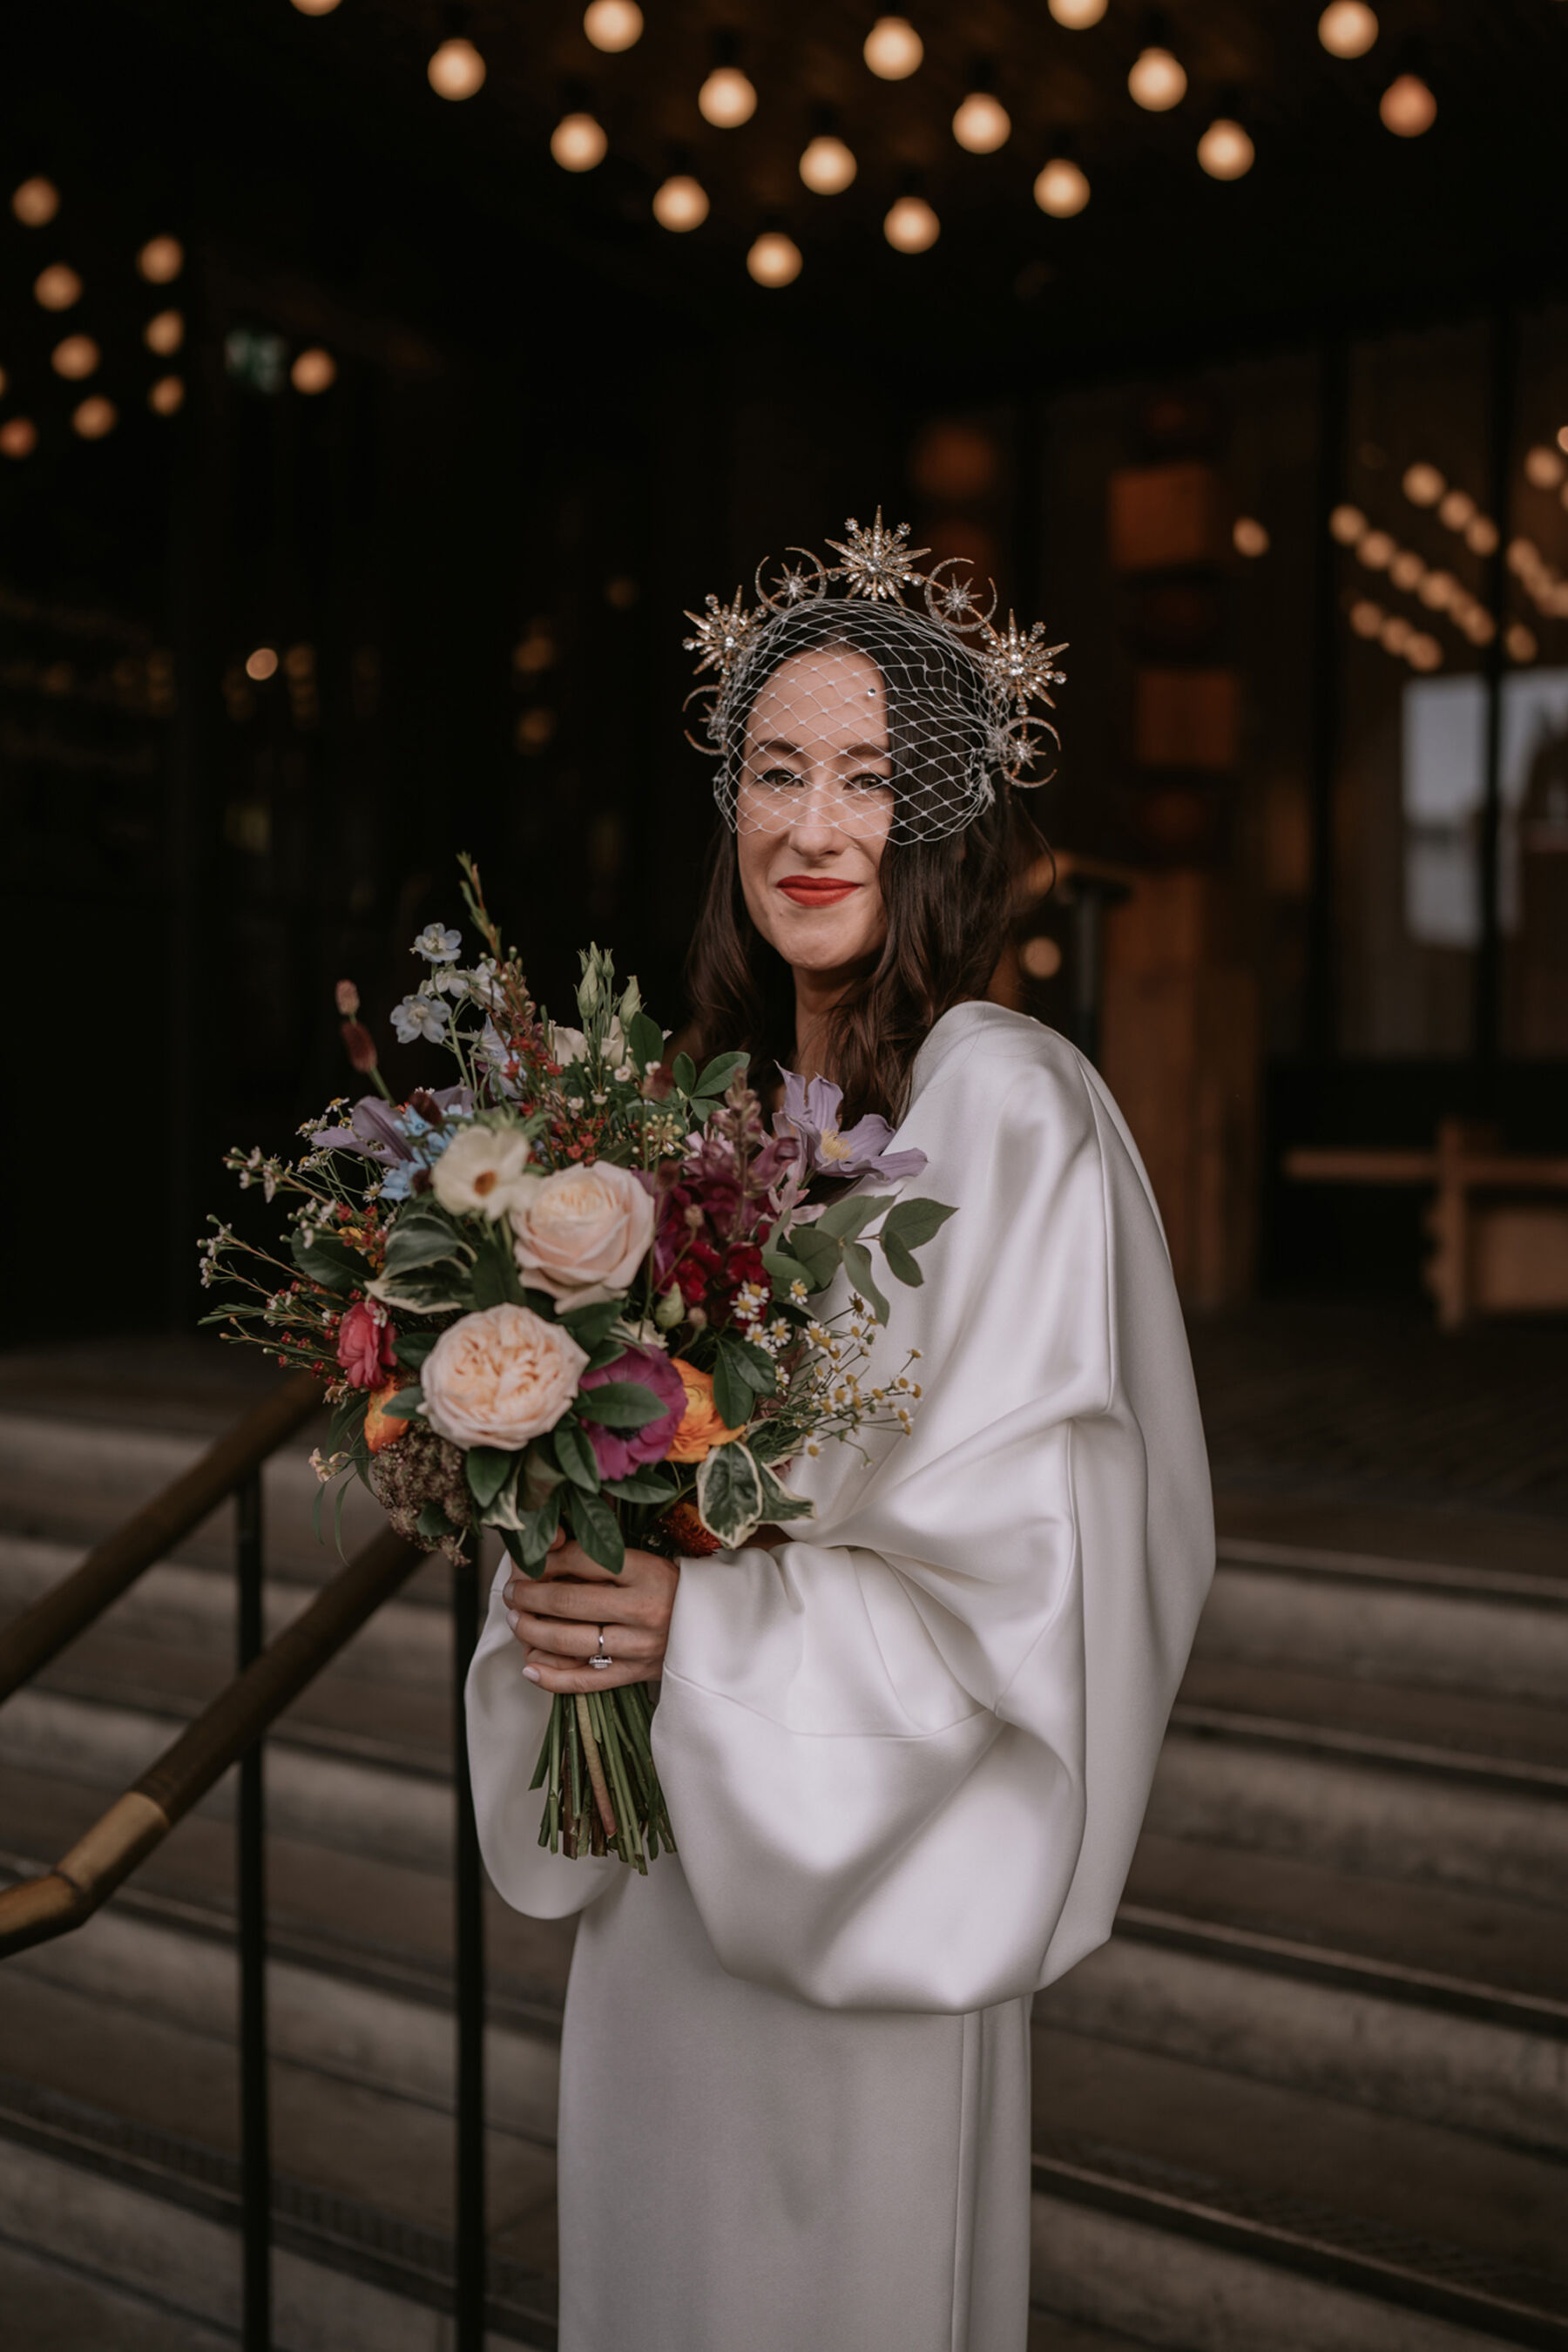 Bride in a modern and ultrastylish Bon Bide wedding dress with long billowed sleeves, carryinga. colourful modern bouquet and wearing a birdcage veil.